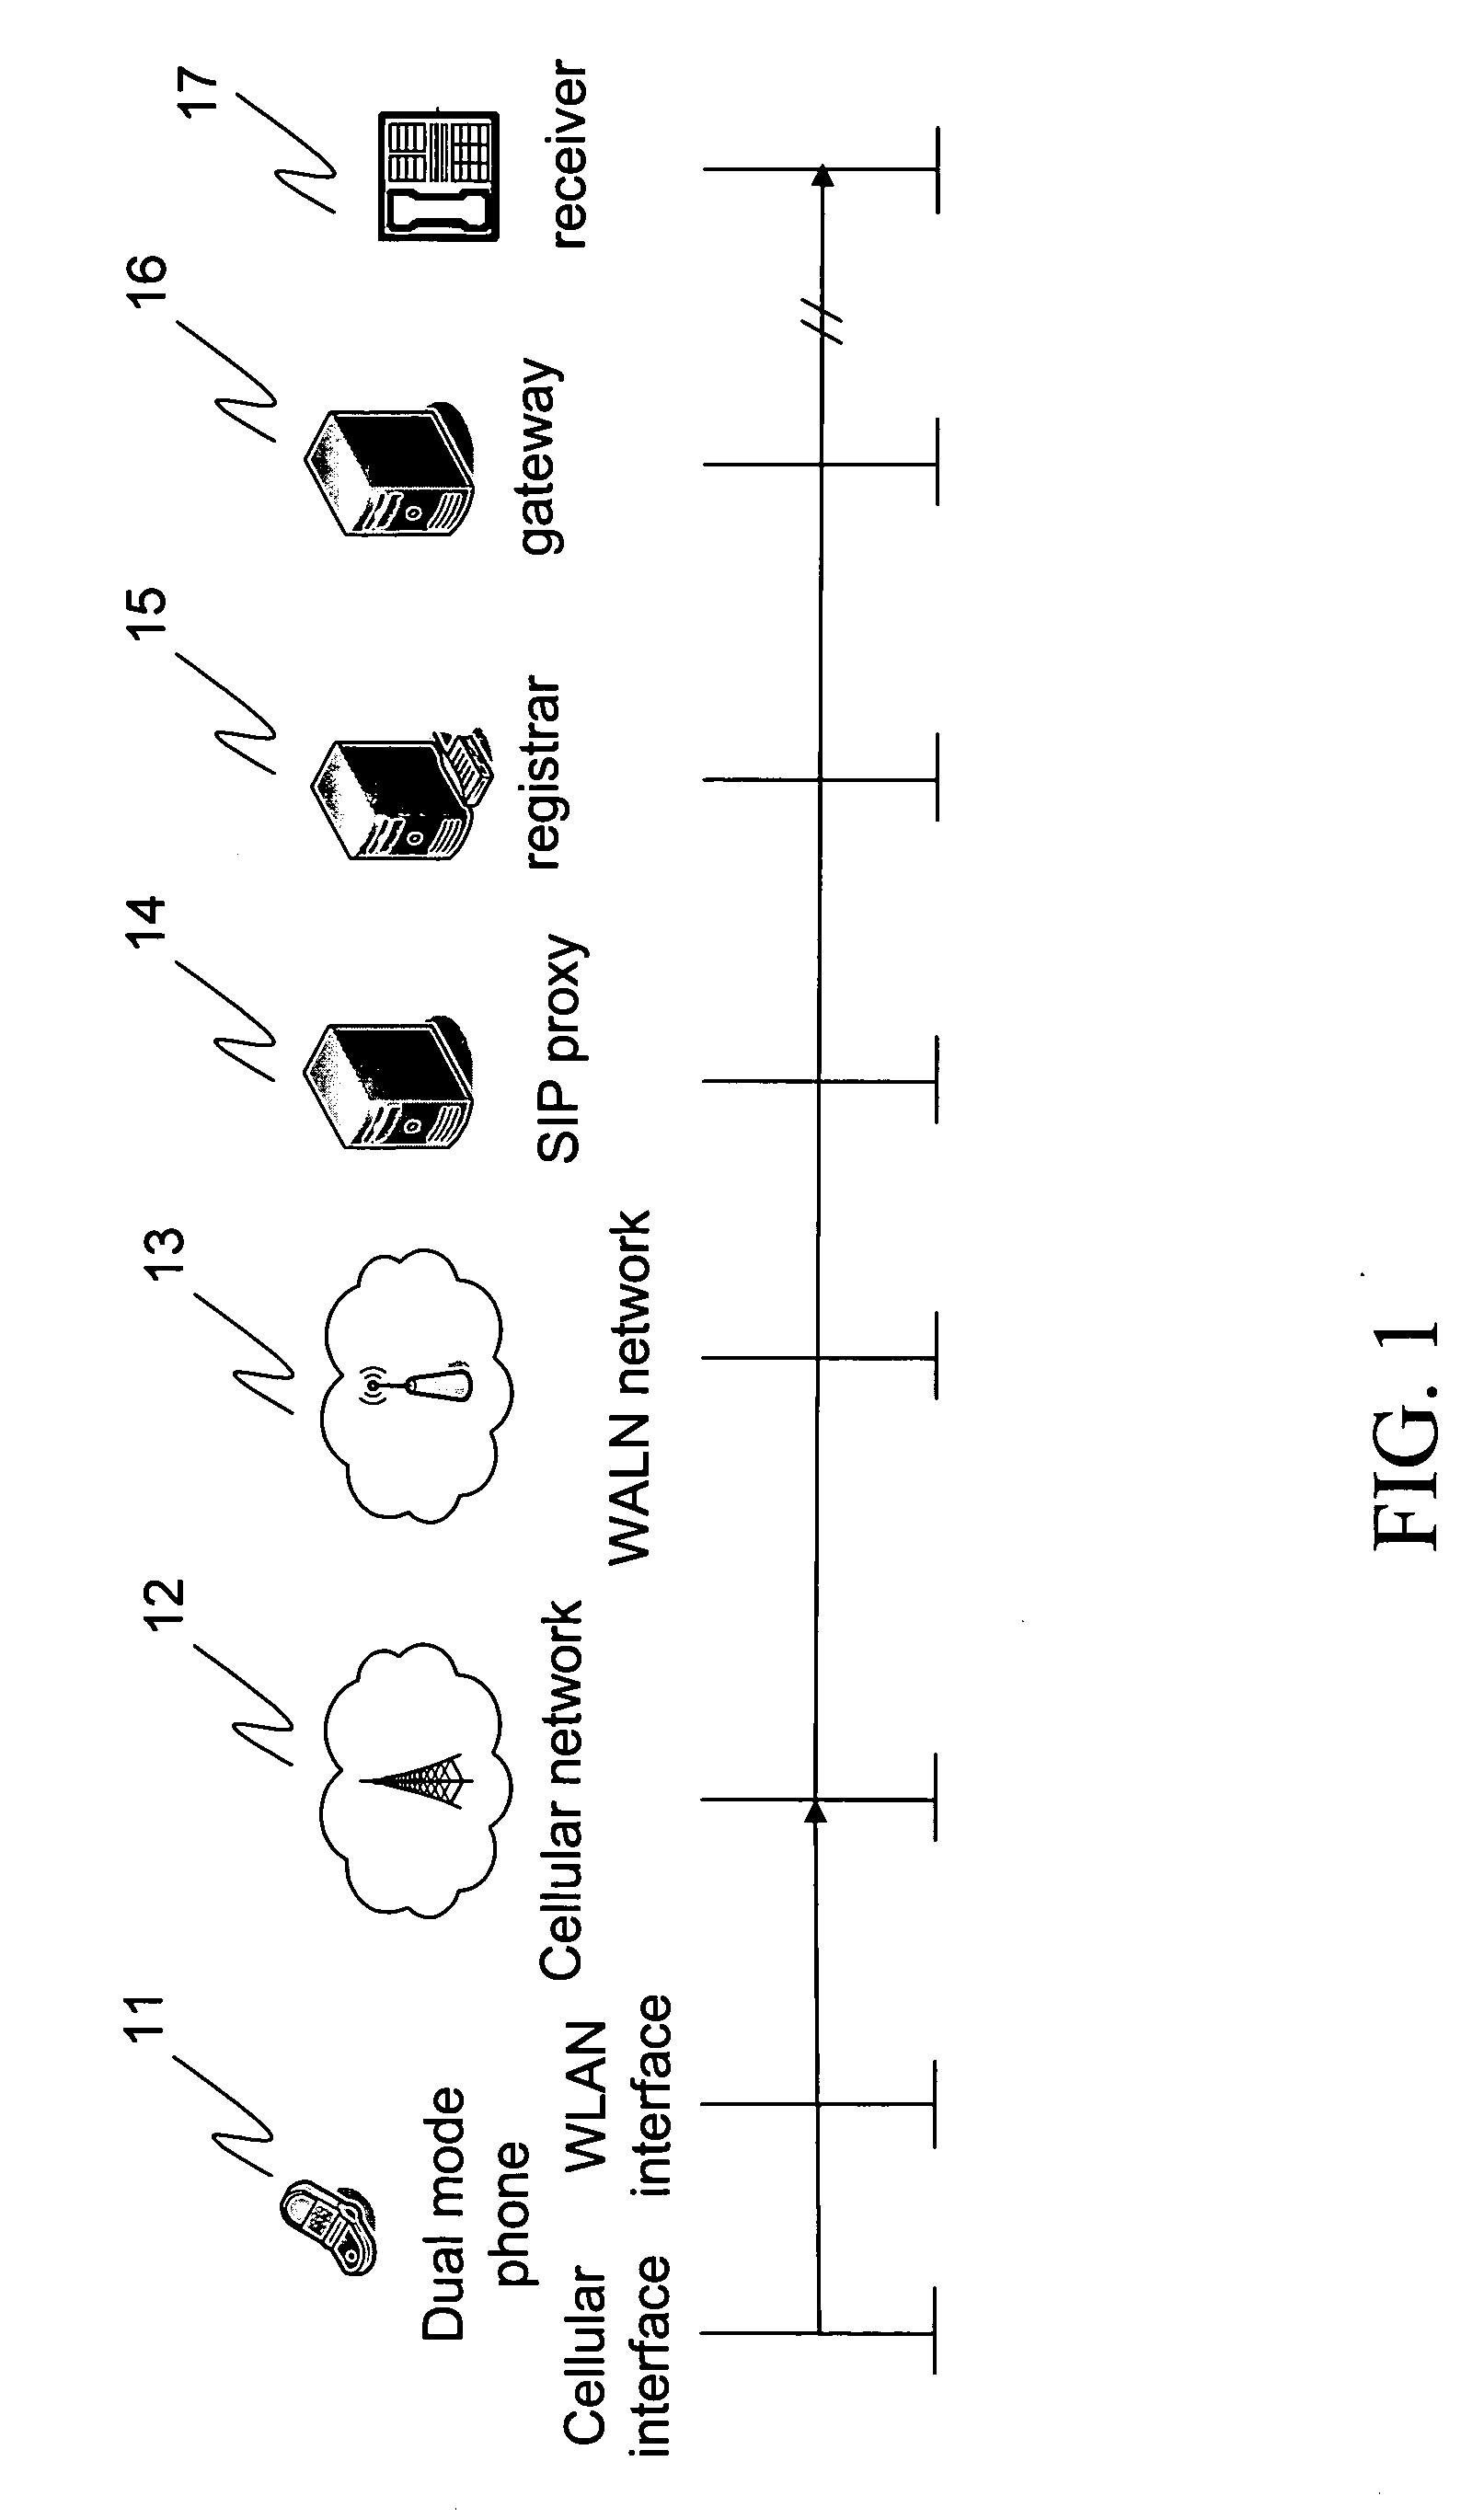 Method and system of providing cellular/WLAN dual mode telecommunication services